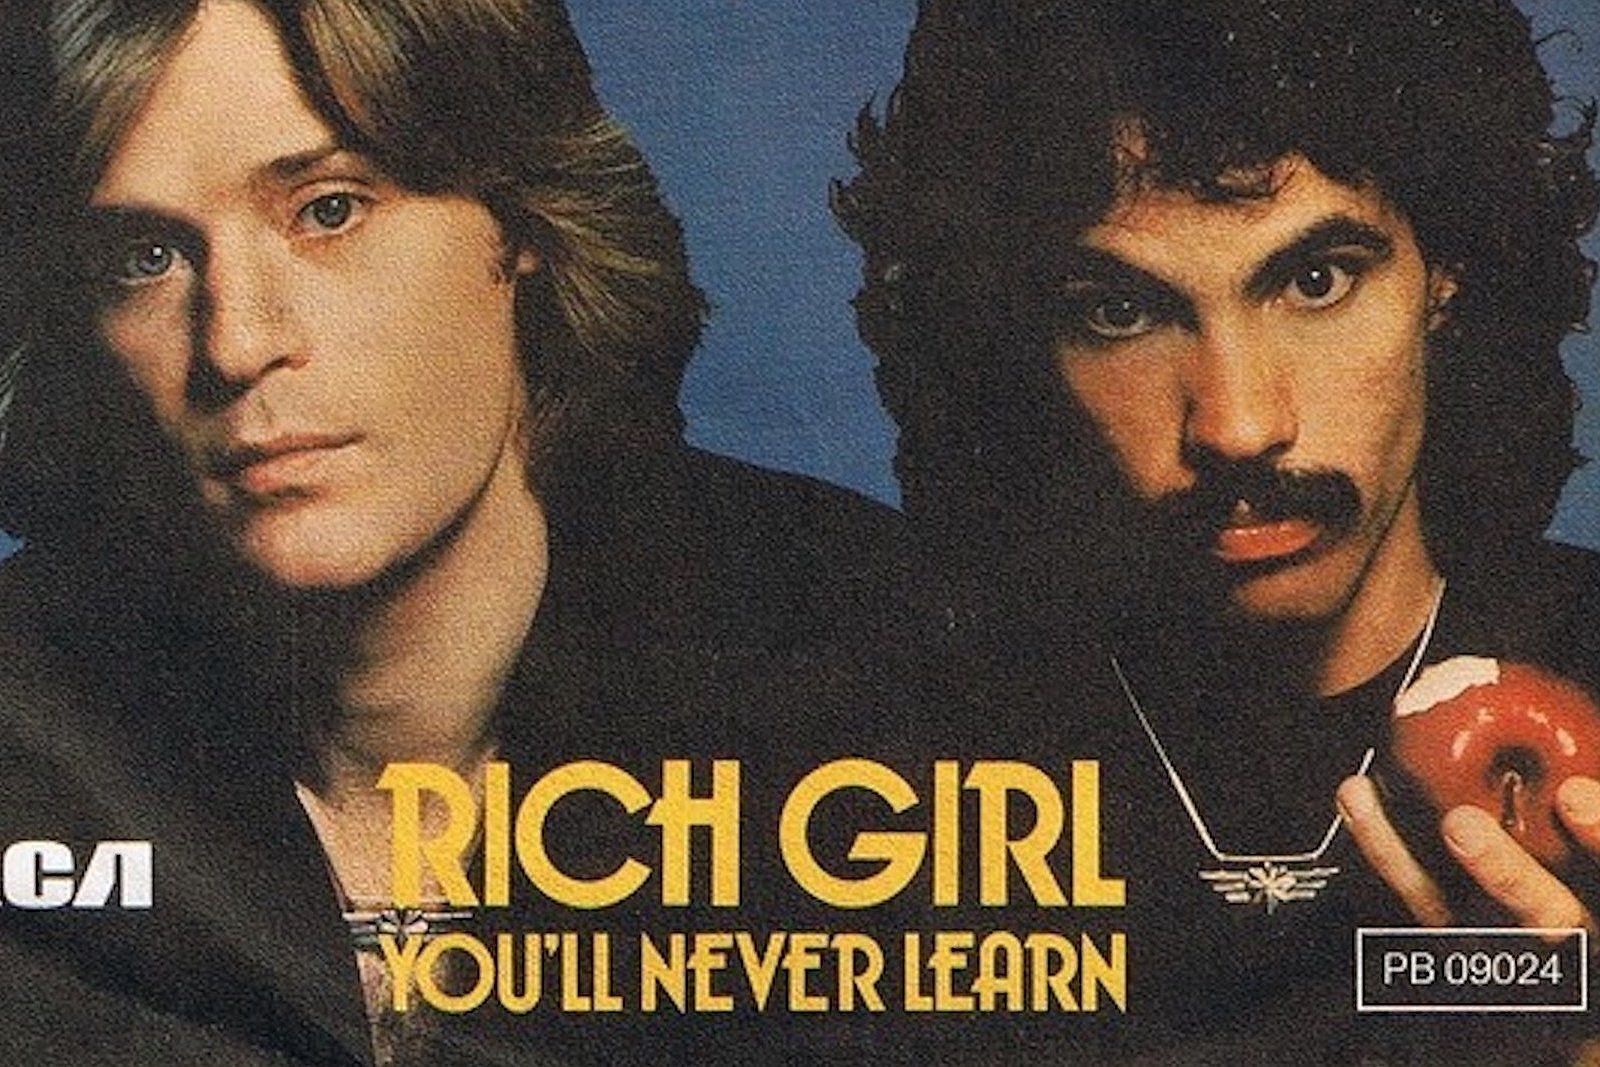 45 Years Ago: Hall and Oates Notch First No. 1 With 'Rich Girl'